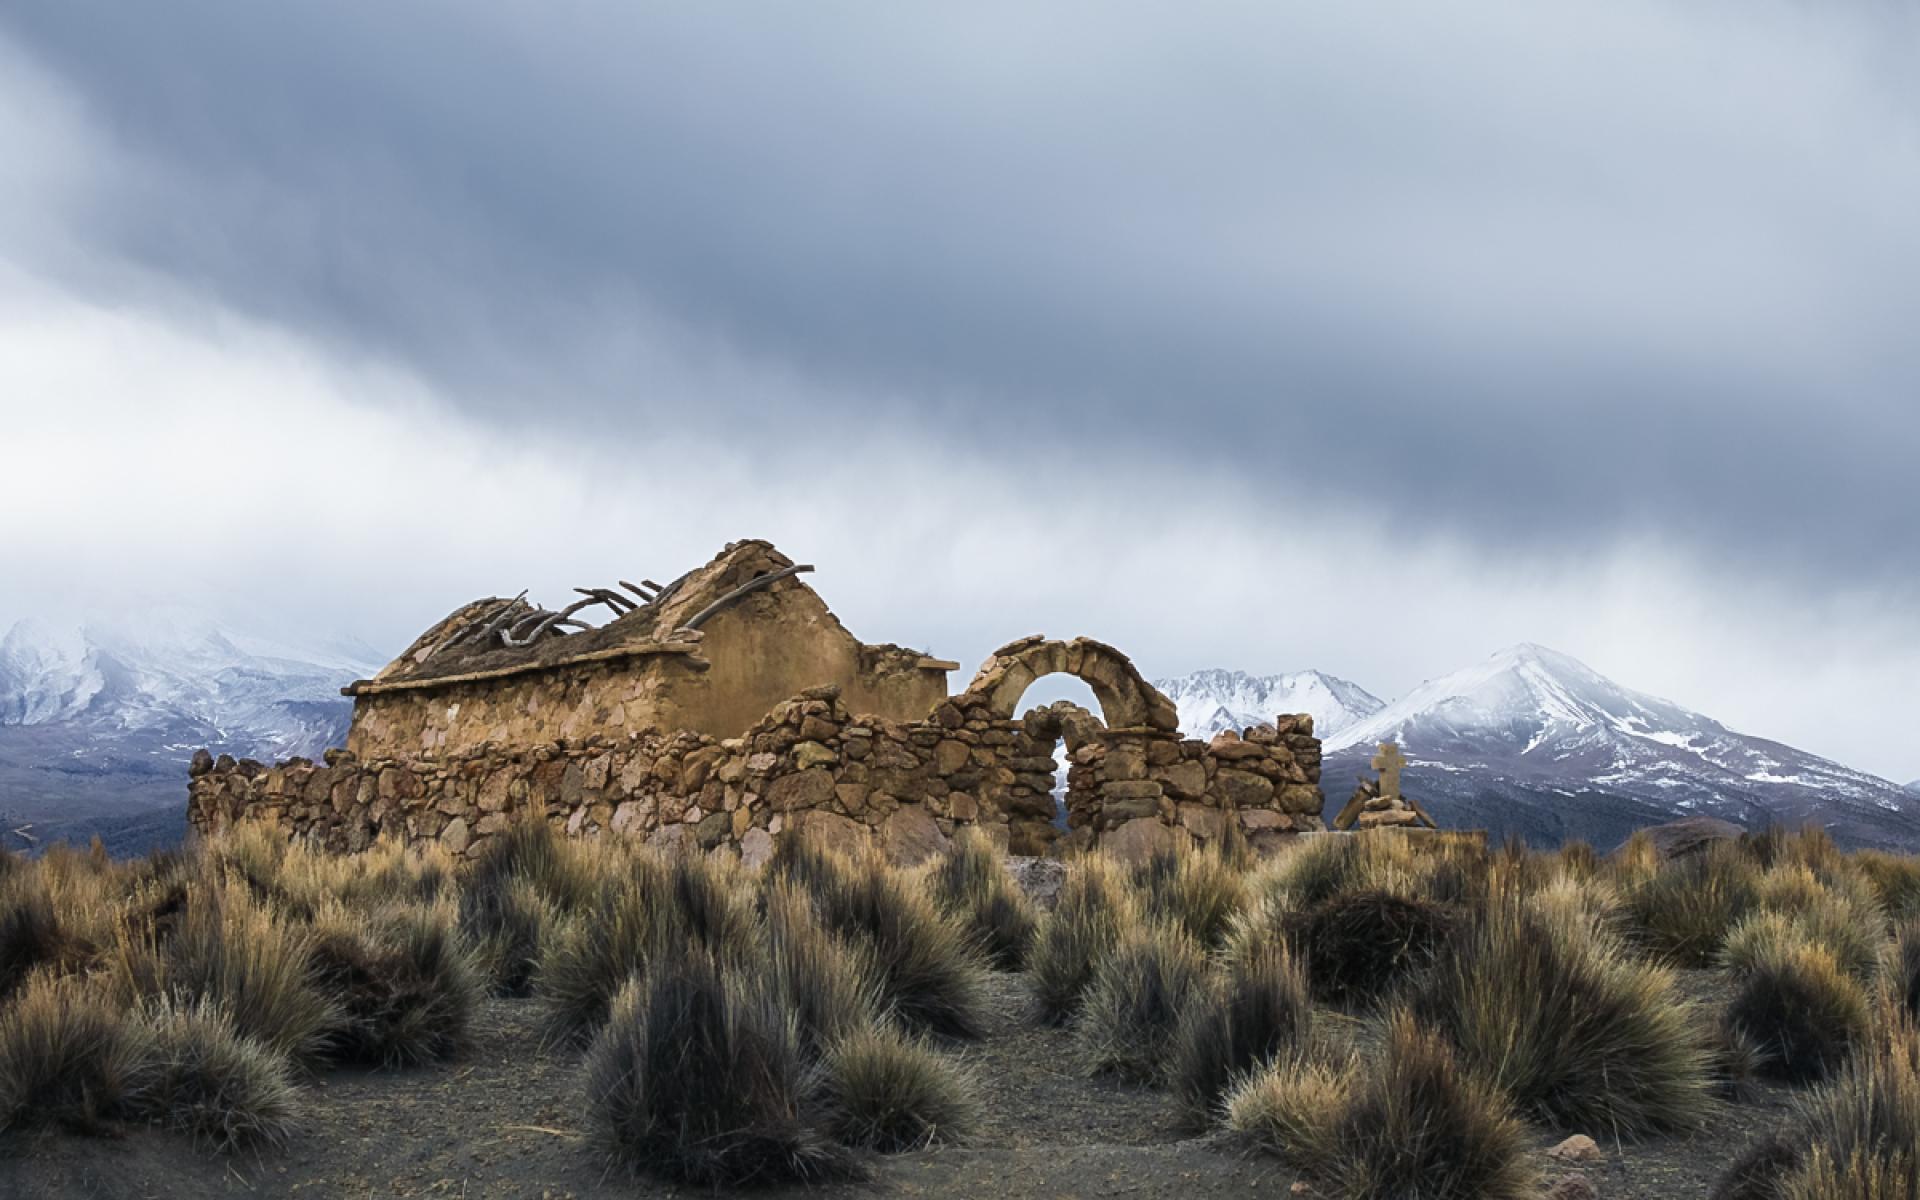 London Photography Awards Winner - A storm in andean life